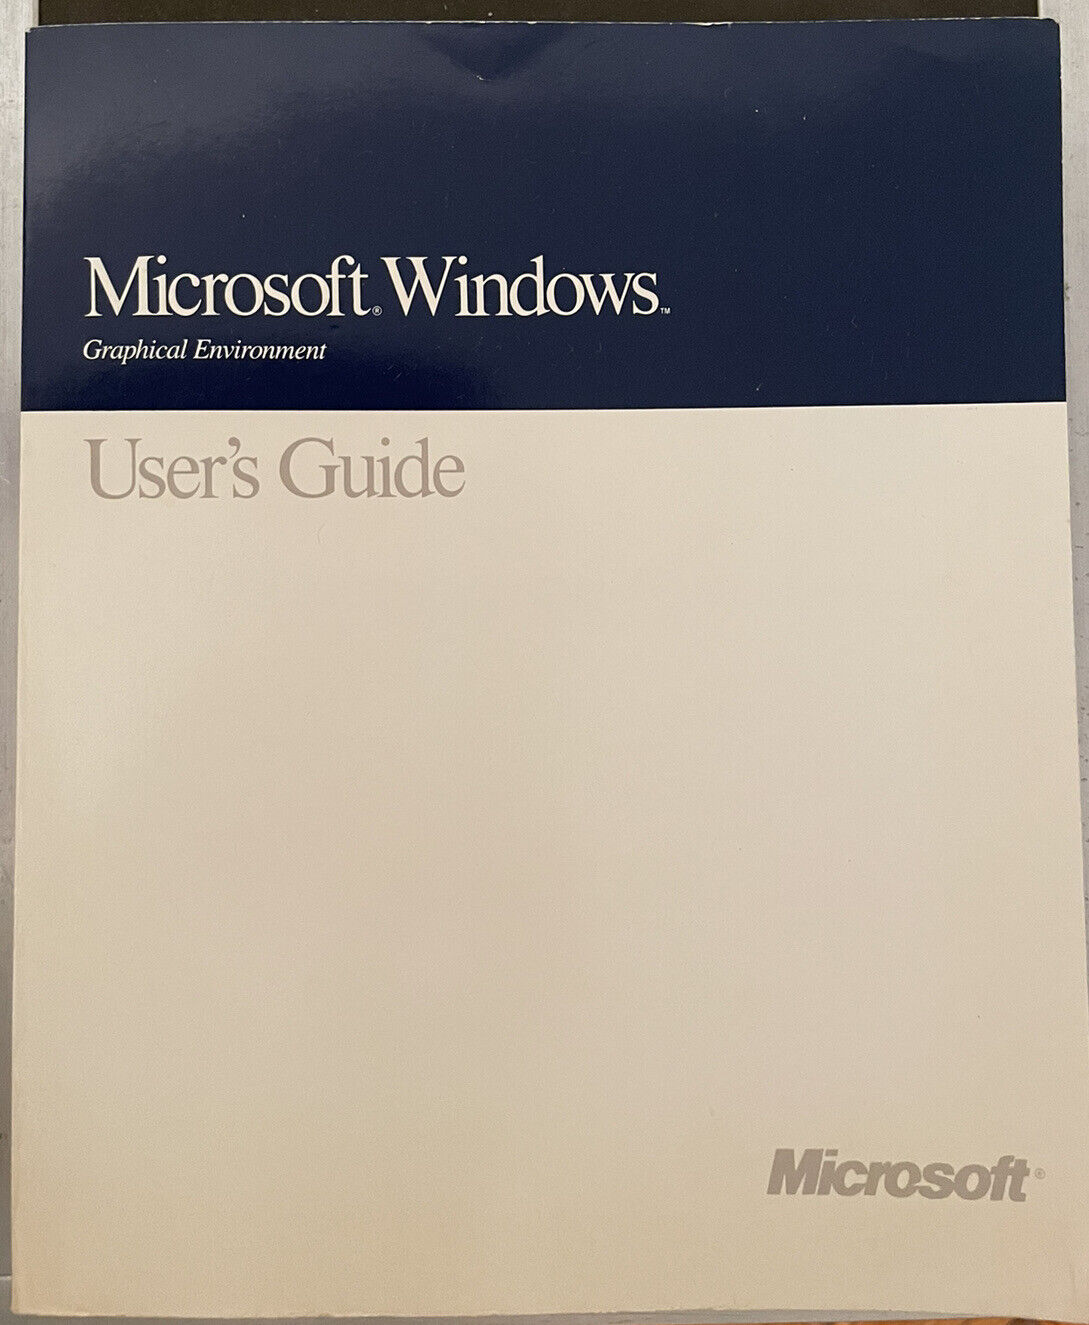 Microsoft Windows Graphical Environment User\'s Guide 3.0 (1990) 650 pages